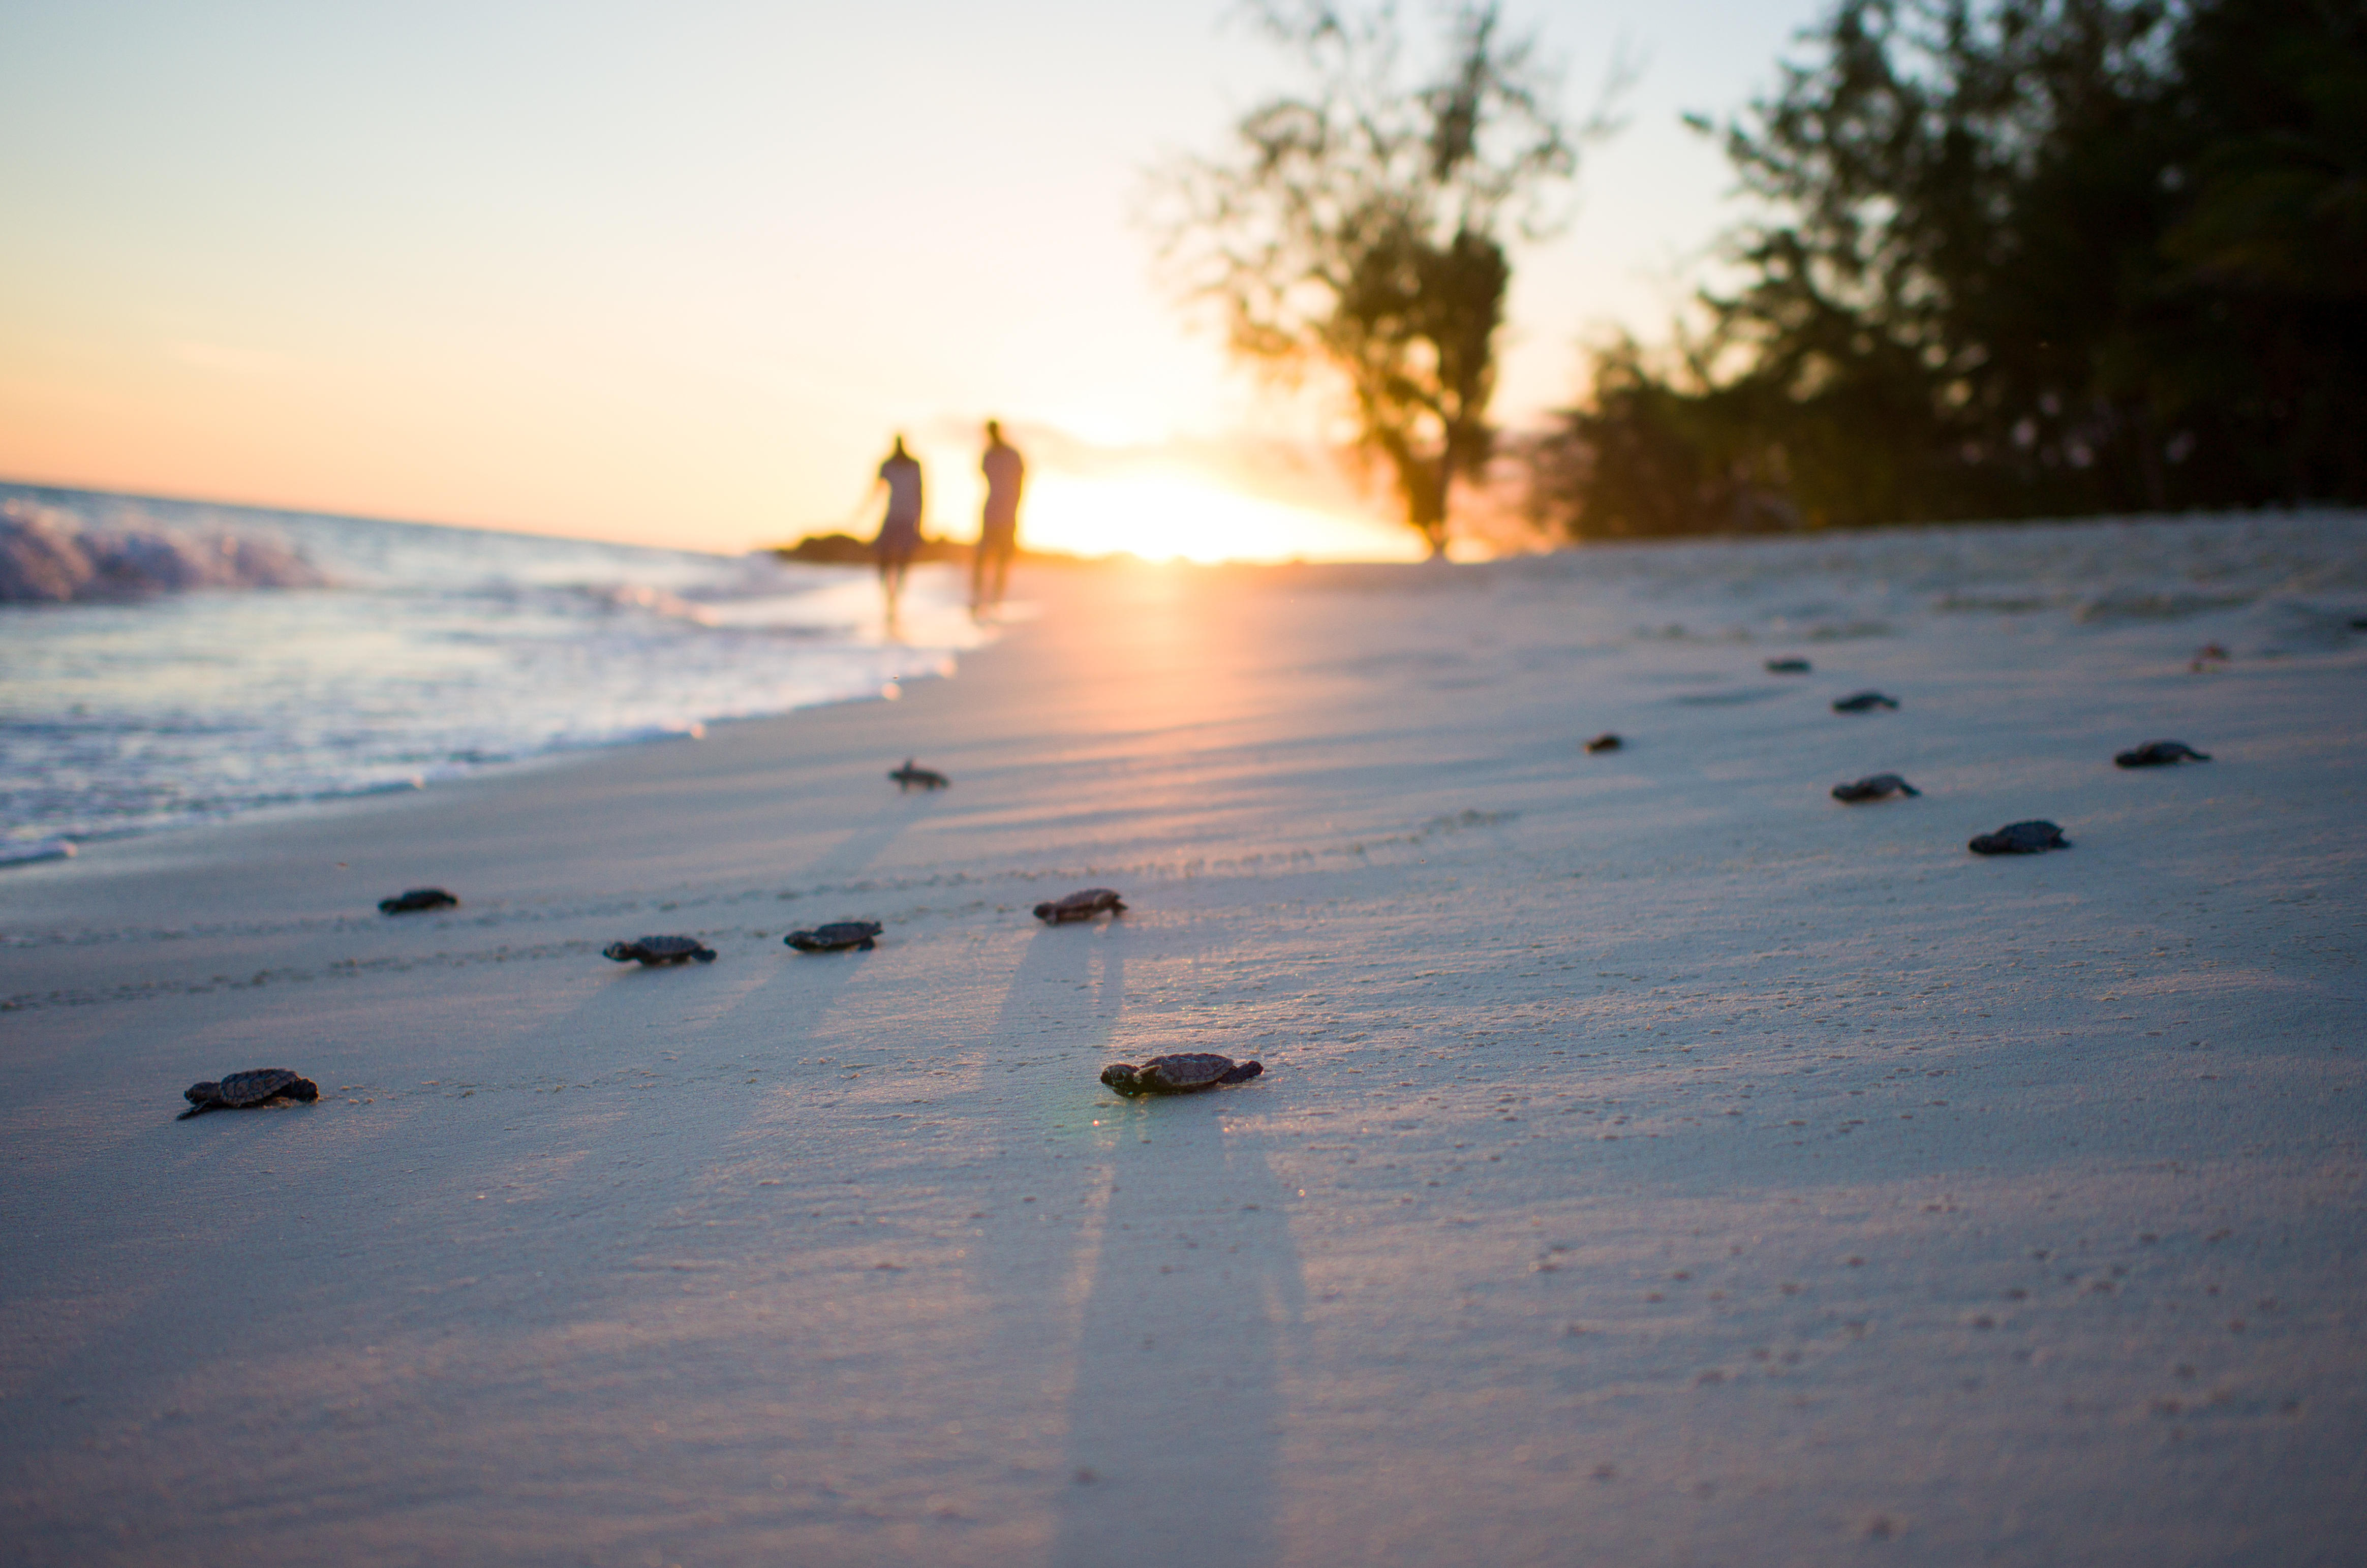 Hatching turtles on the beach at sunset, Barbados (Alamy/PA)